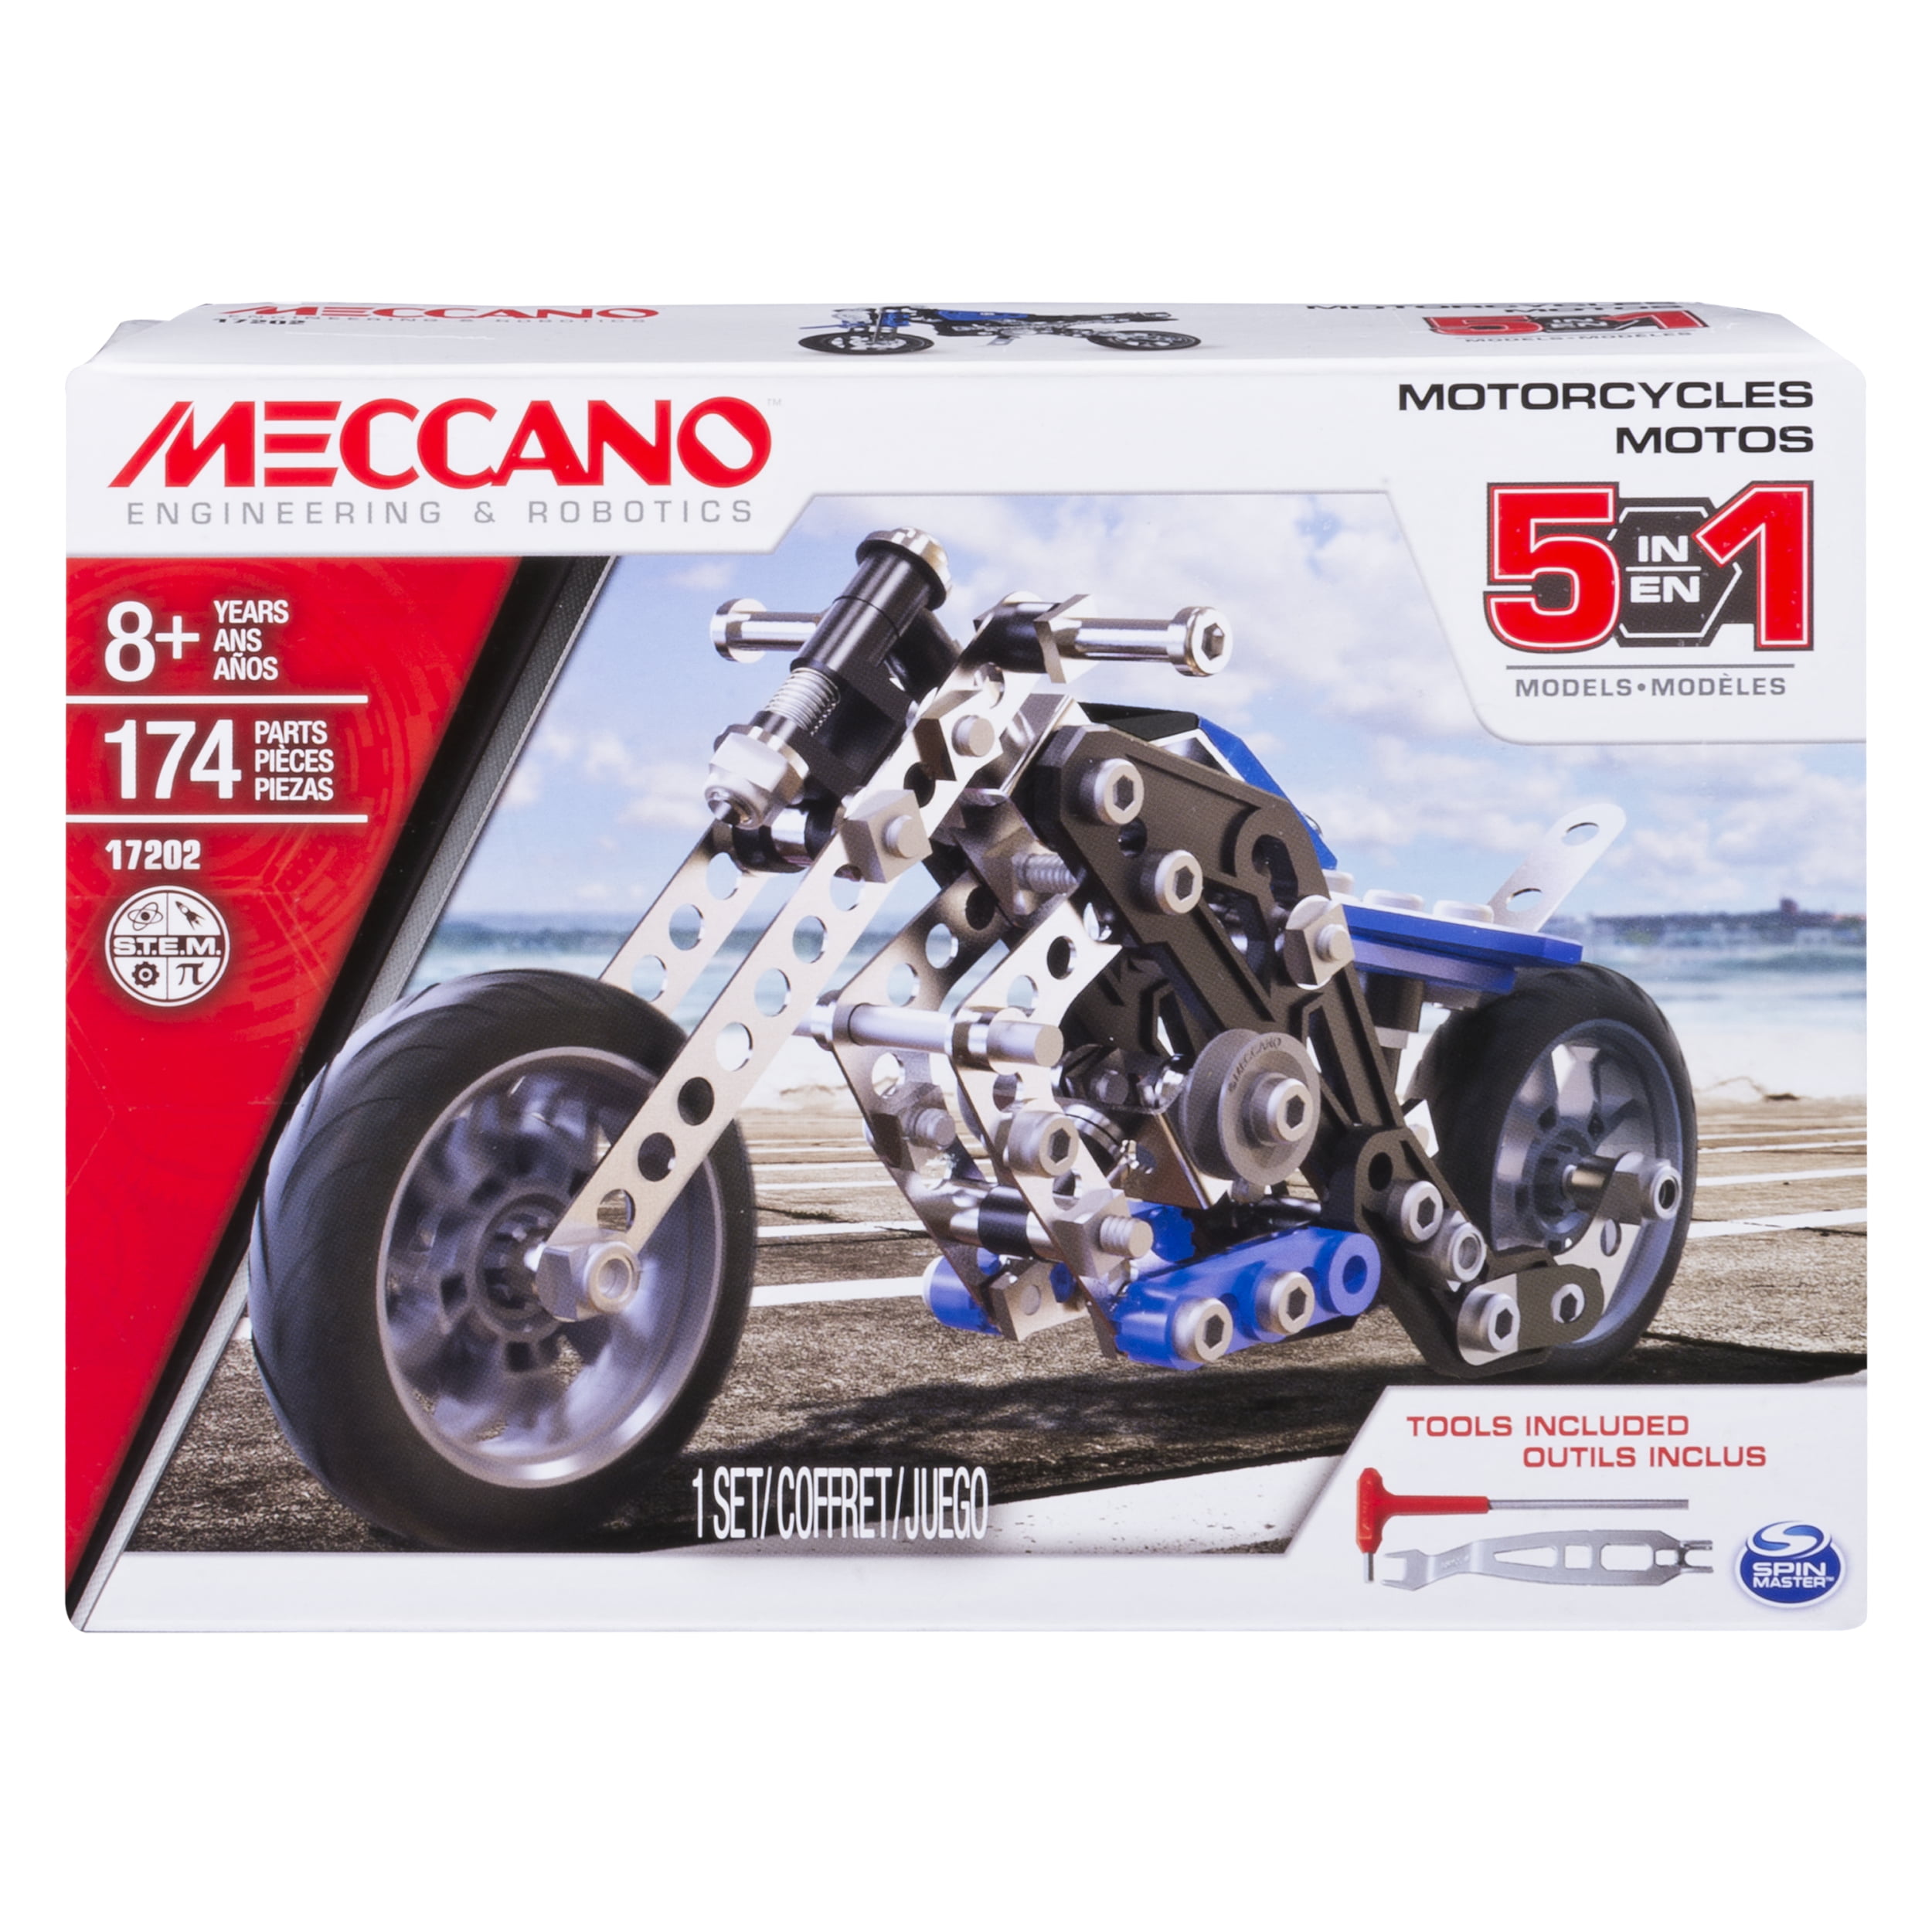 Meccano 5-in-1 Roadster Set - A2Z Science & Learning Toy Store